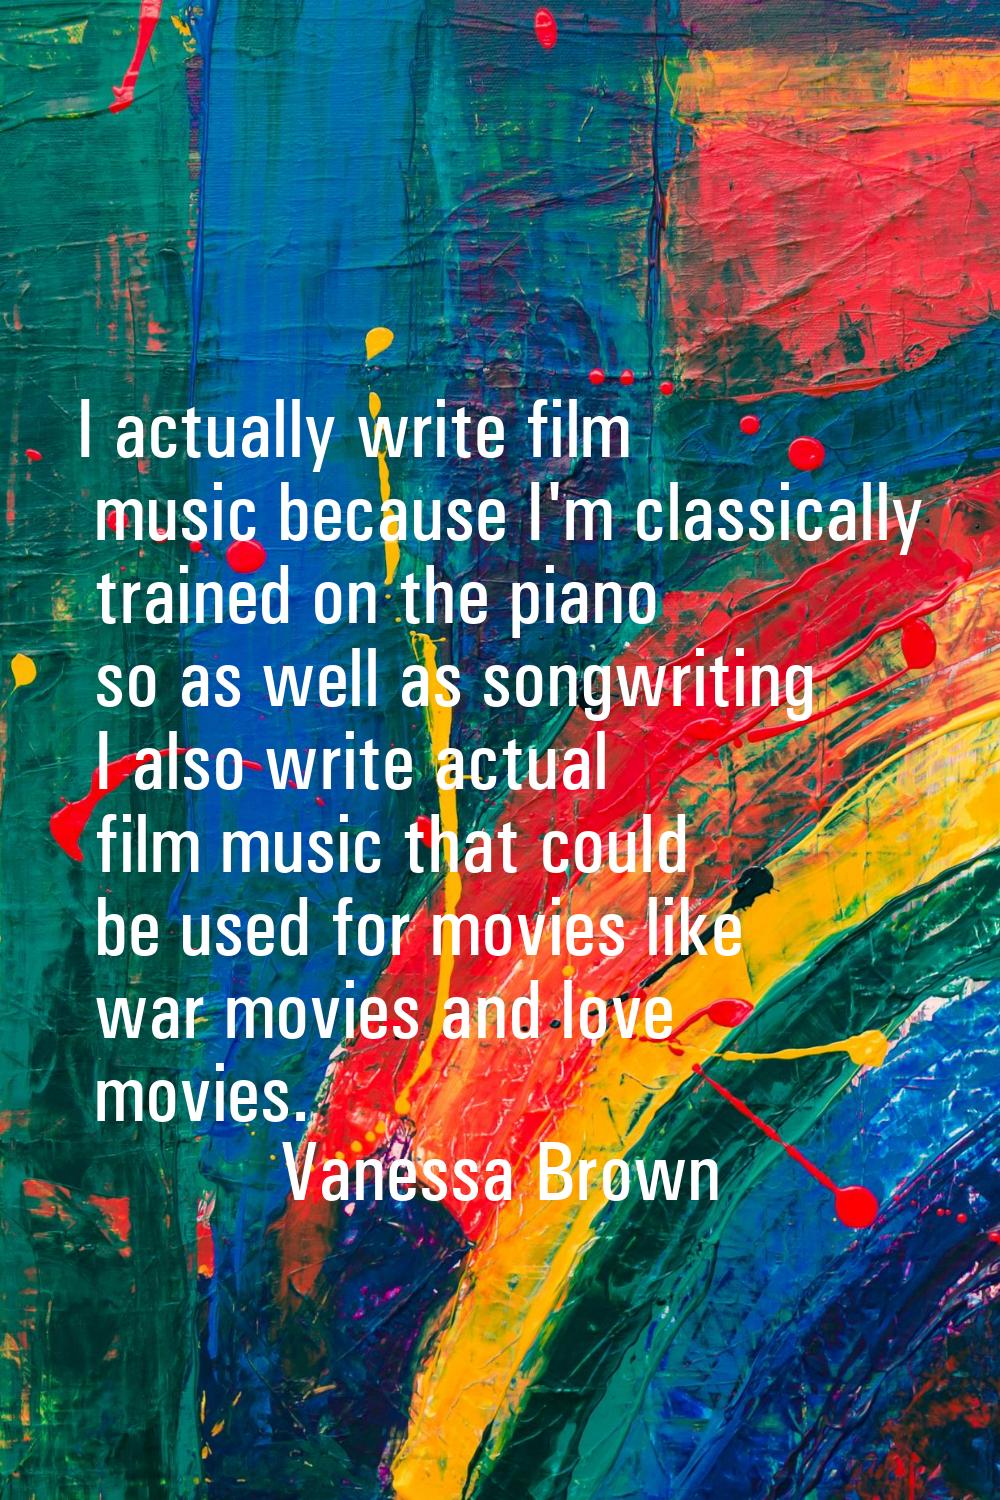 I actually write film music because I'm classically trained on the piano so as well as songwriting 